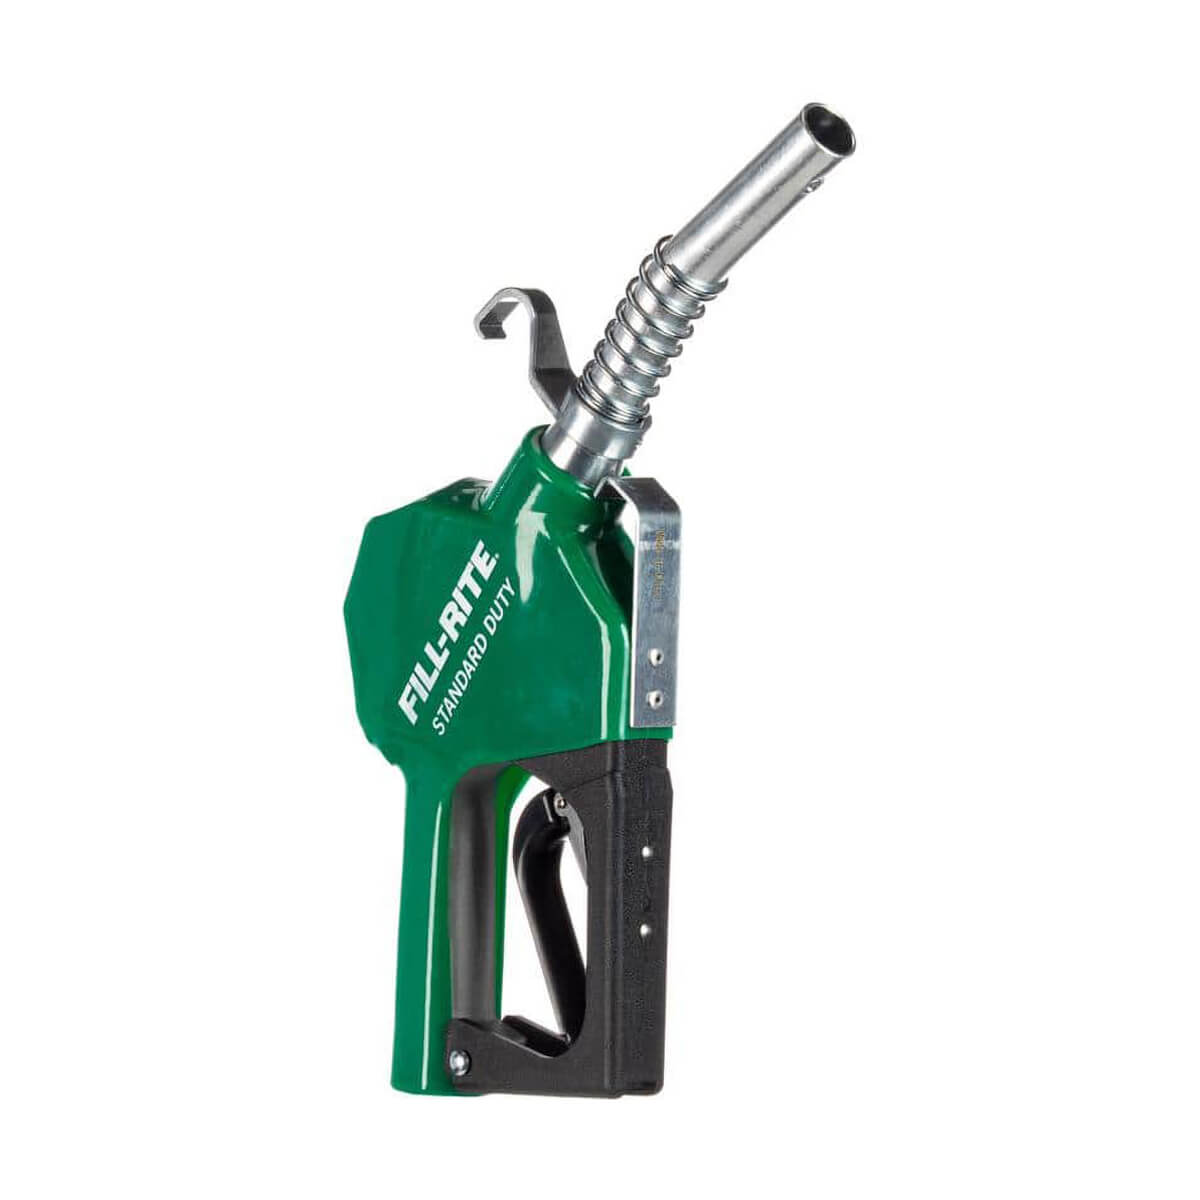 Automatic Diesel Spout Nozzle - Green - 3/4-in